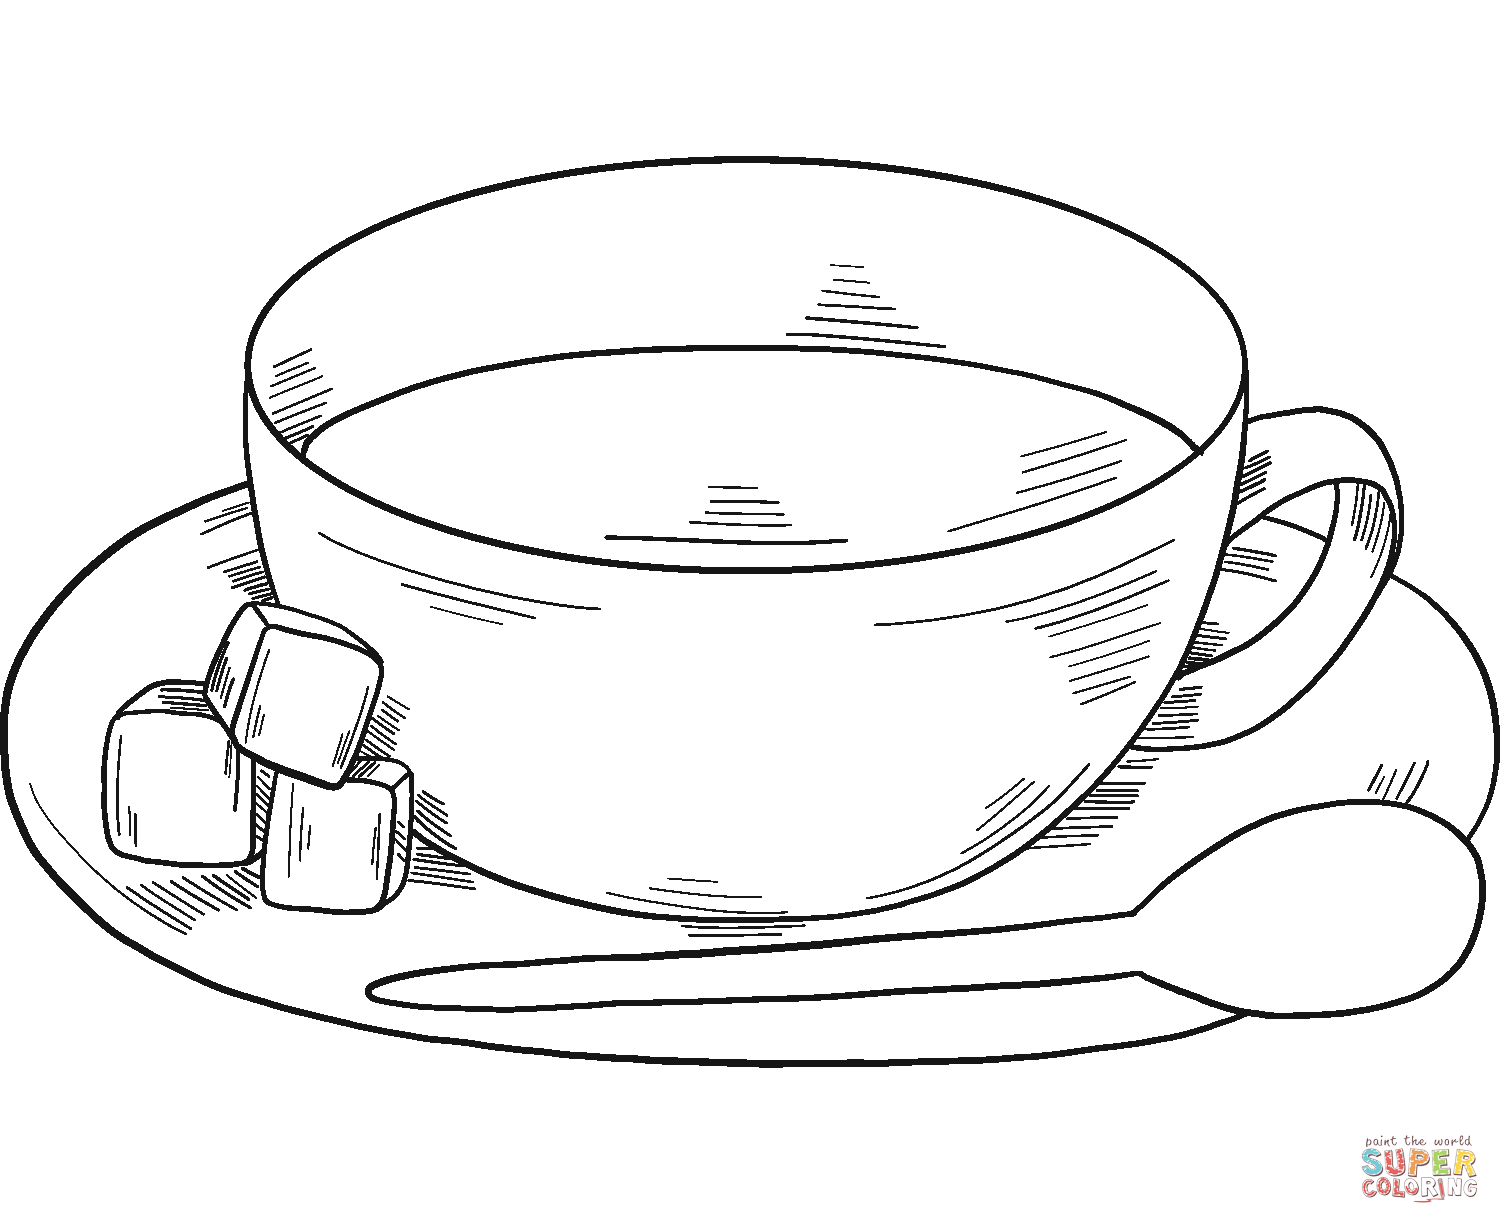 Cup of Tea coloring page | Free Printable Coloring Pages